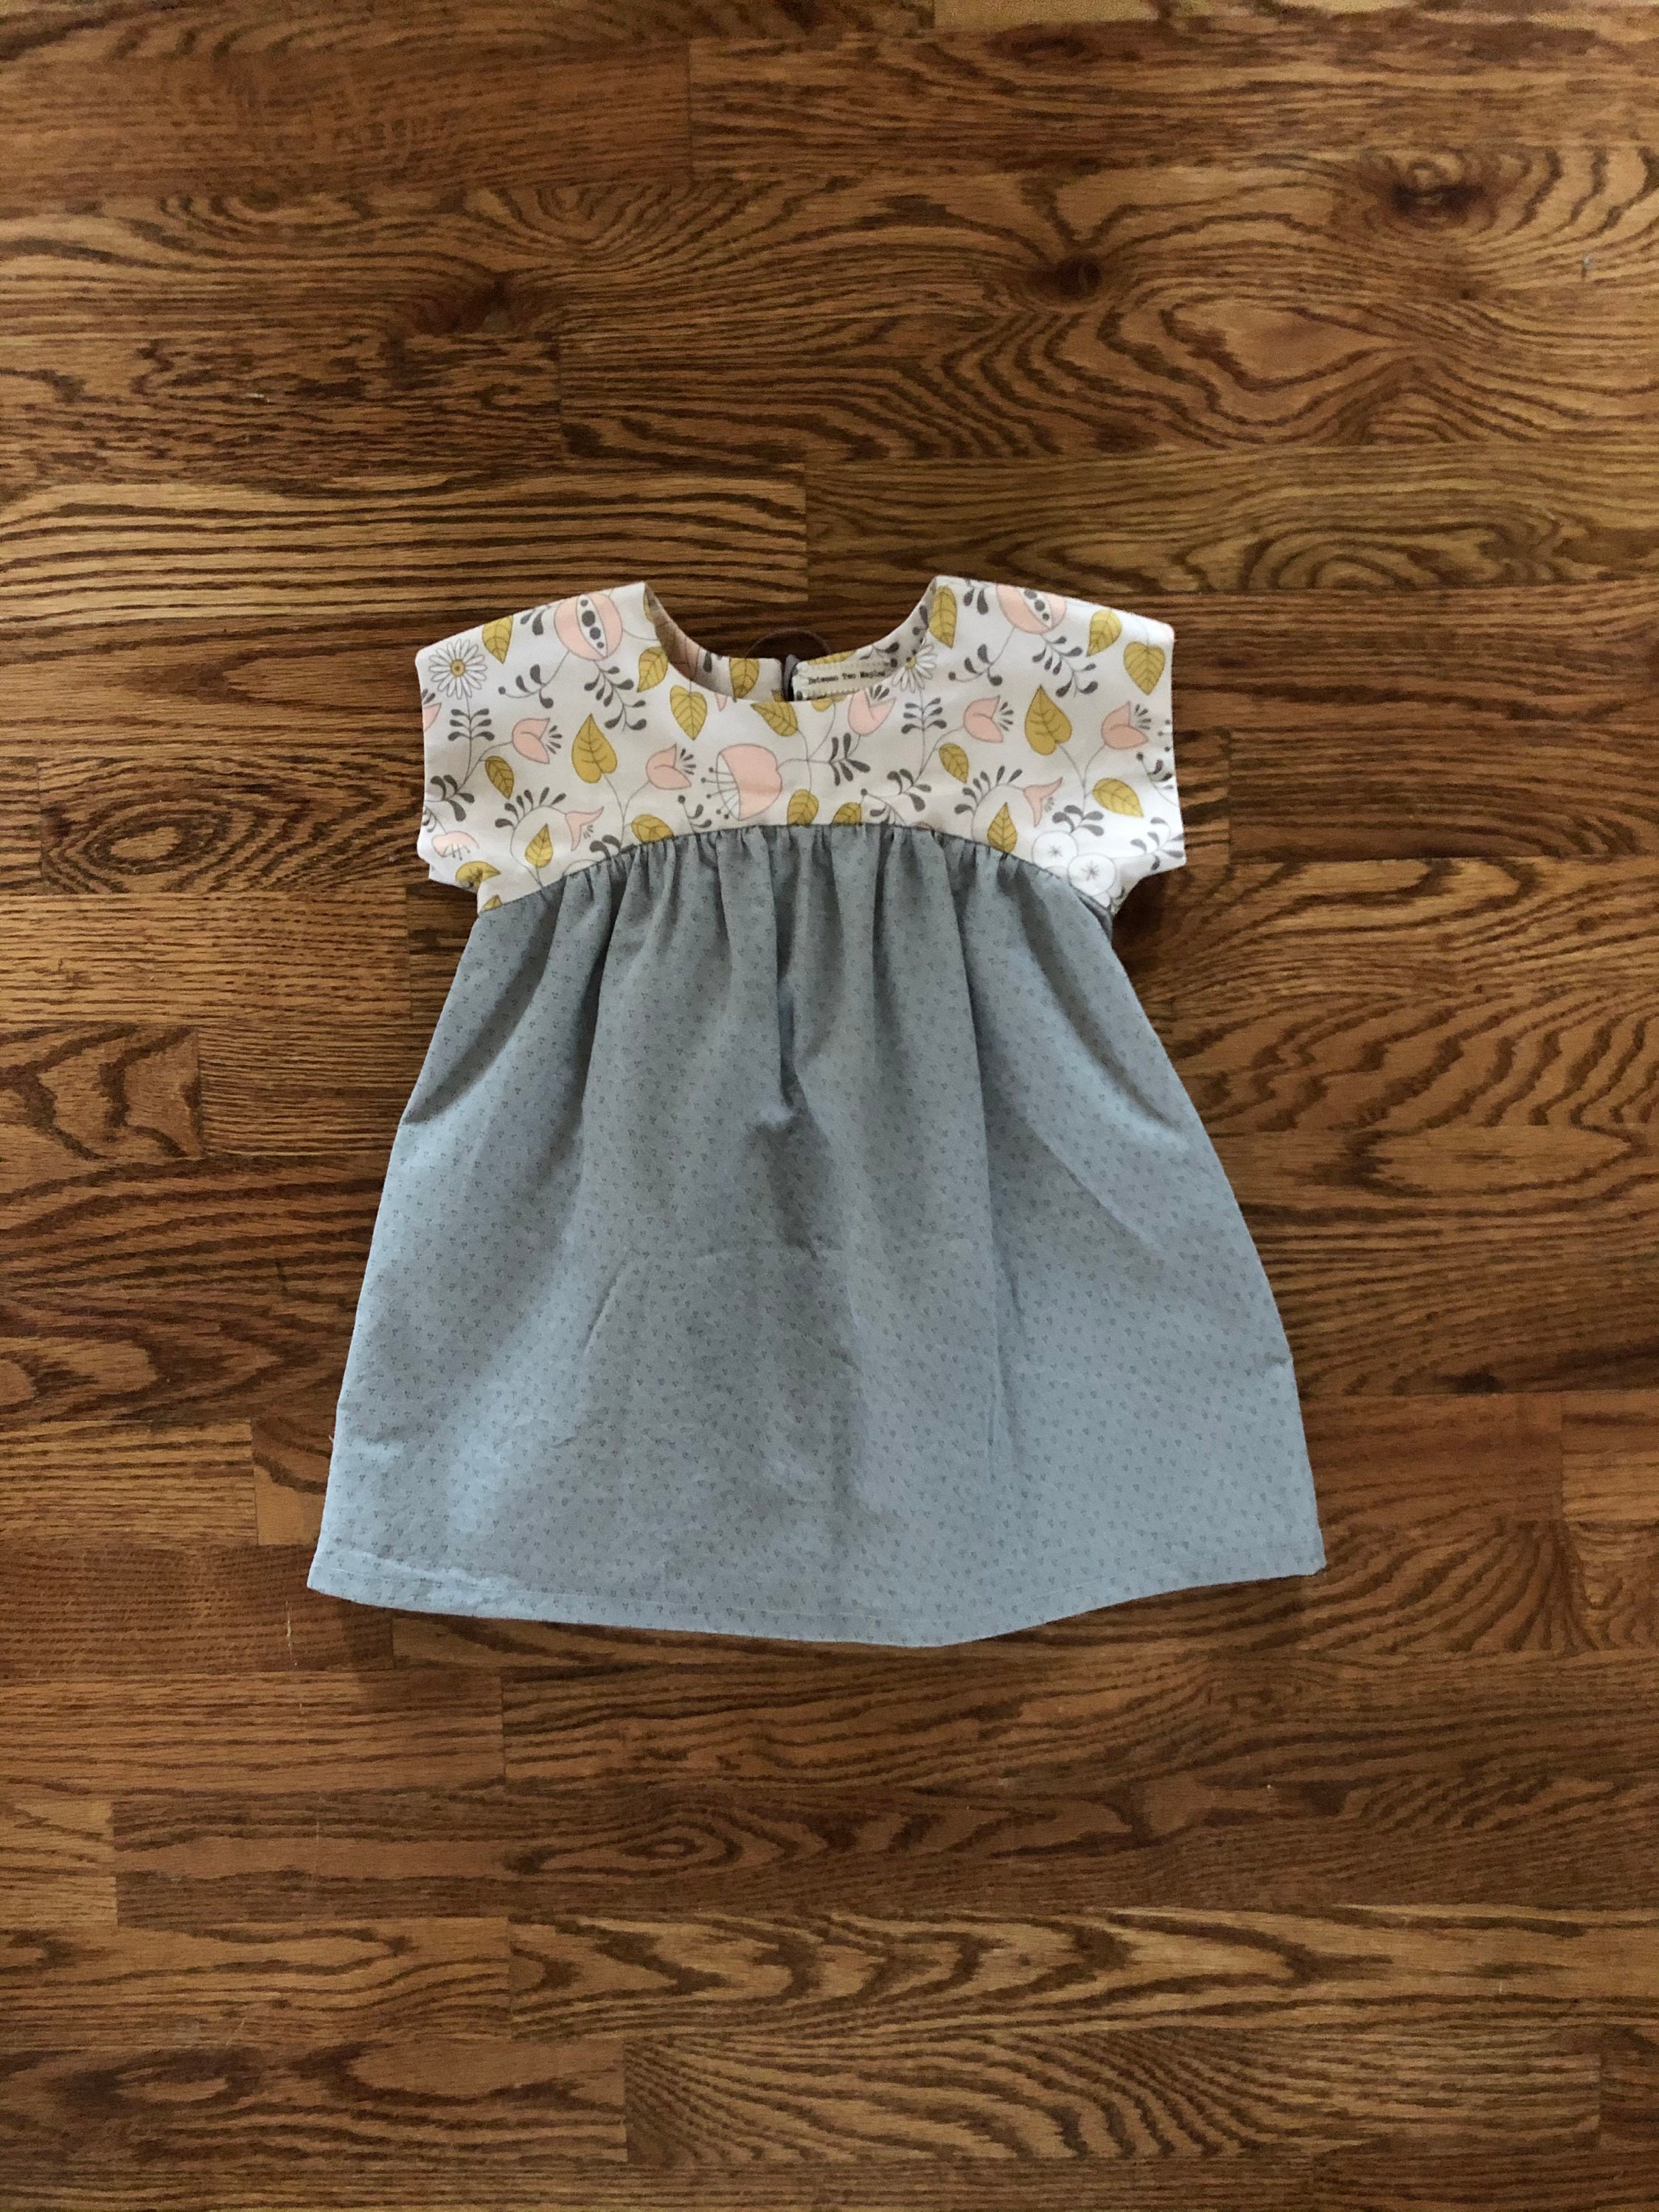 Floral dress for baby toddler and girls Mod gray and pink | Etsy